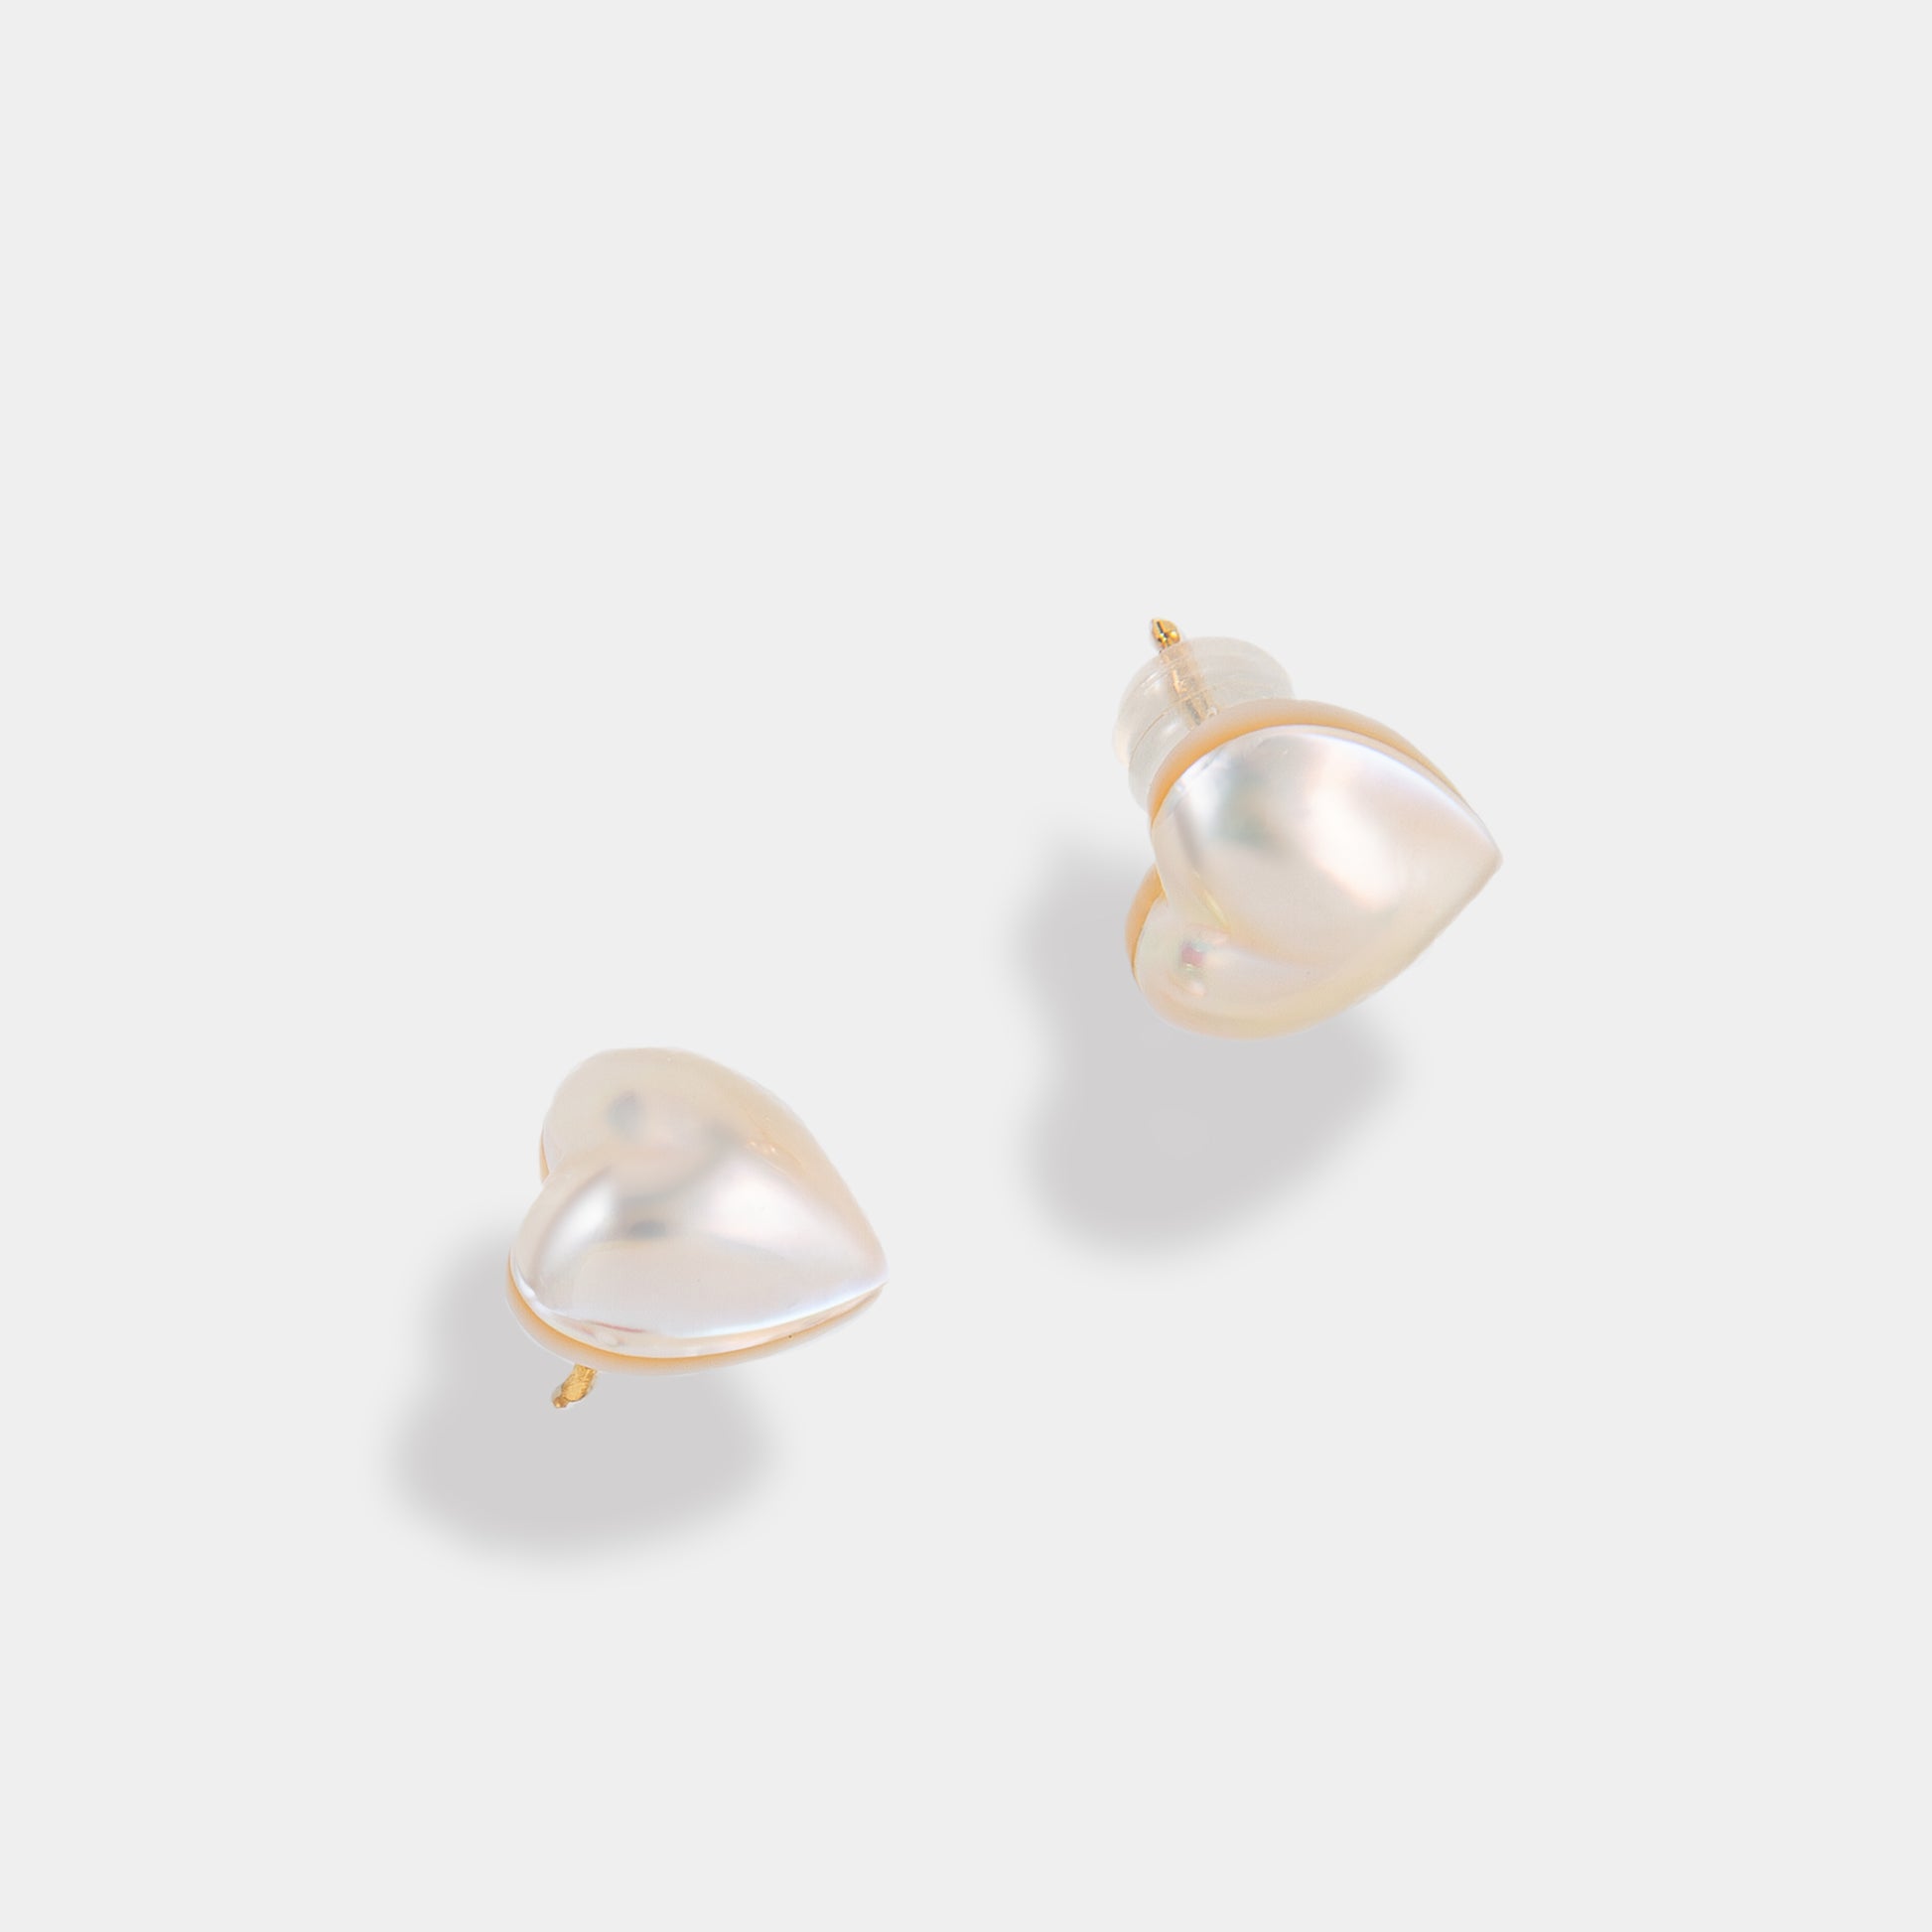 Embrace the beauty of these delicate white heart-shaped pearl stud earrings. A symbol of love and grace, they are a must-have for every jewelry collection.